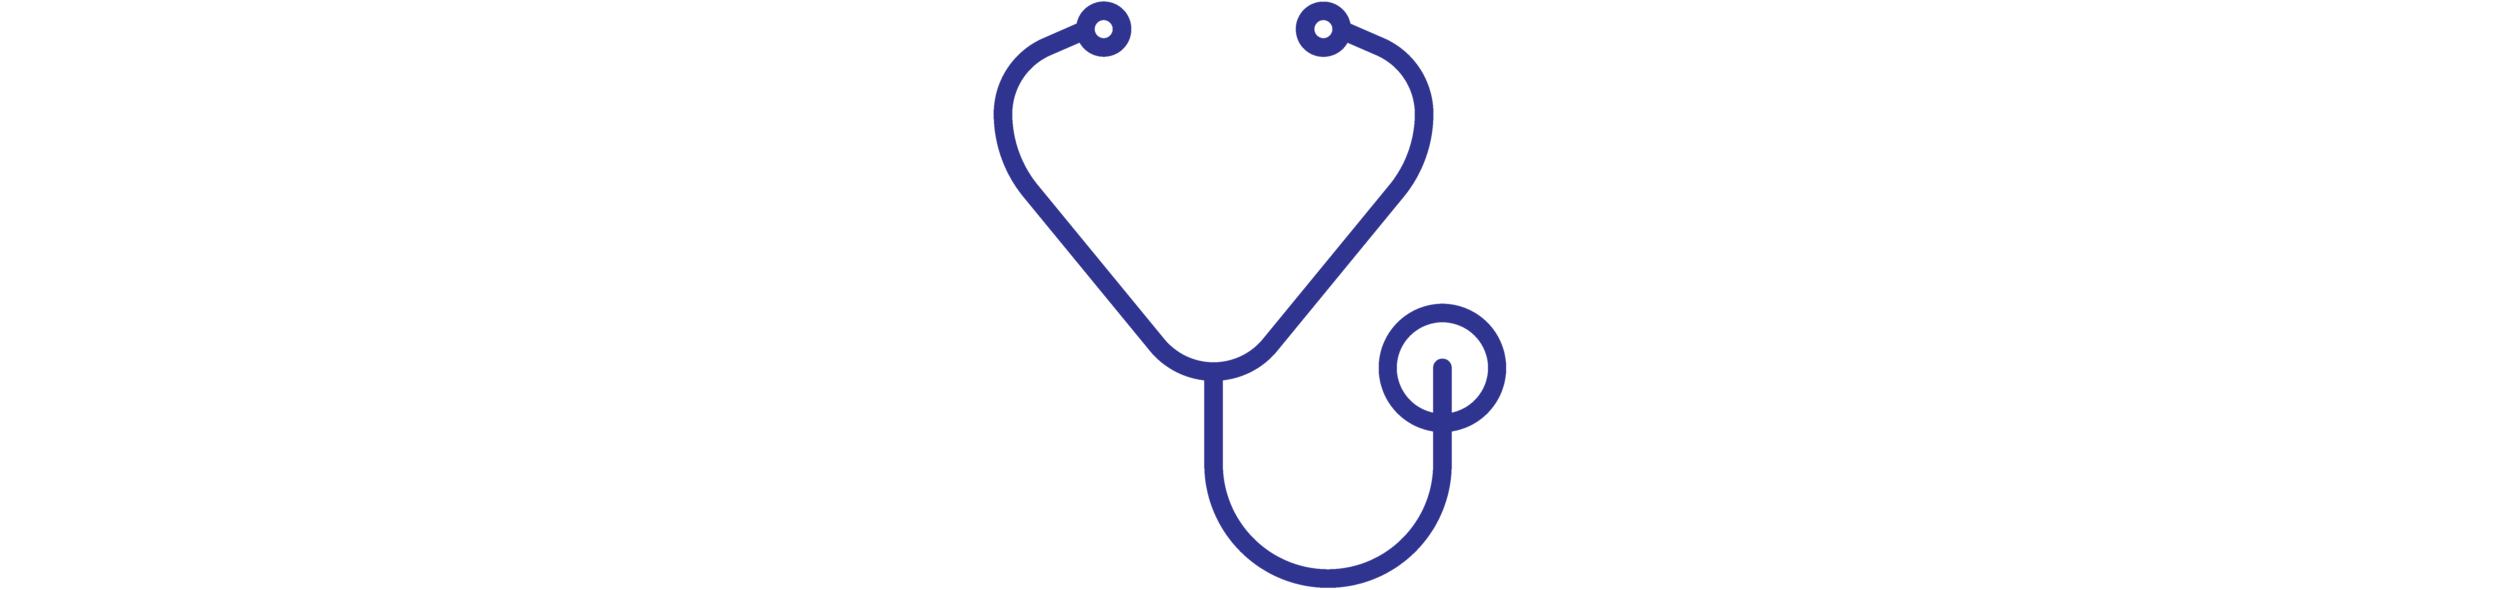 HPHA-category-icons-healthcare.png